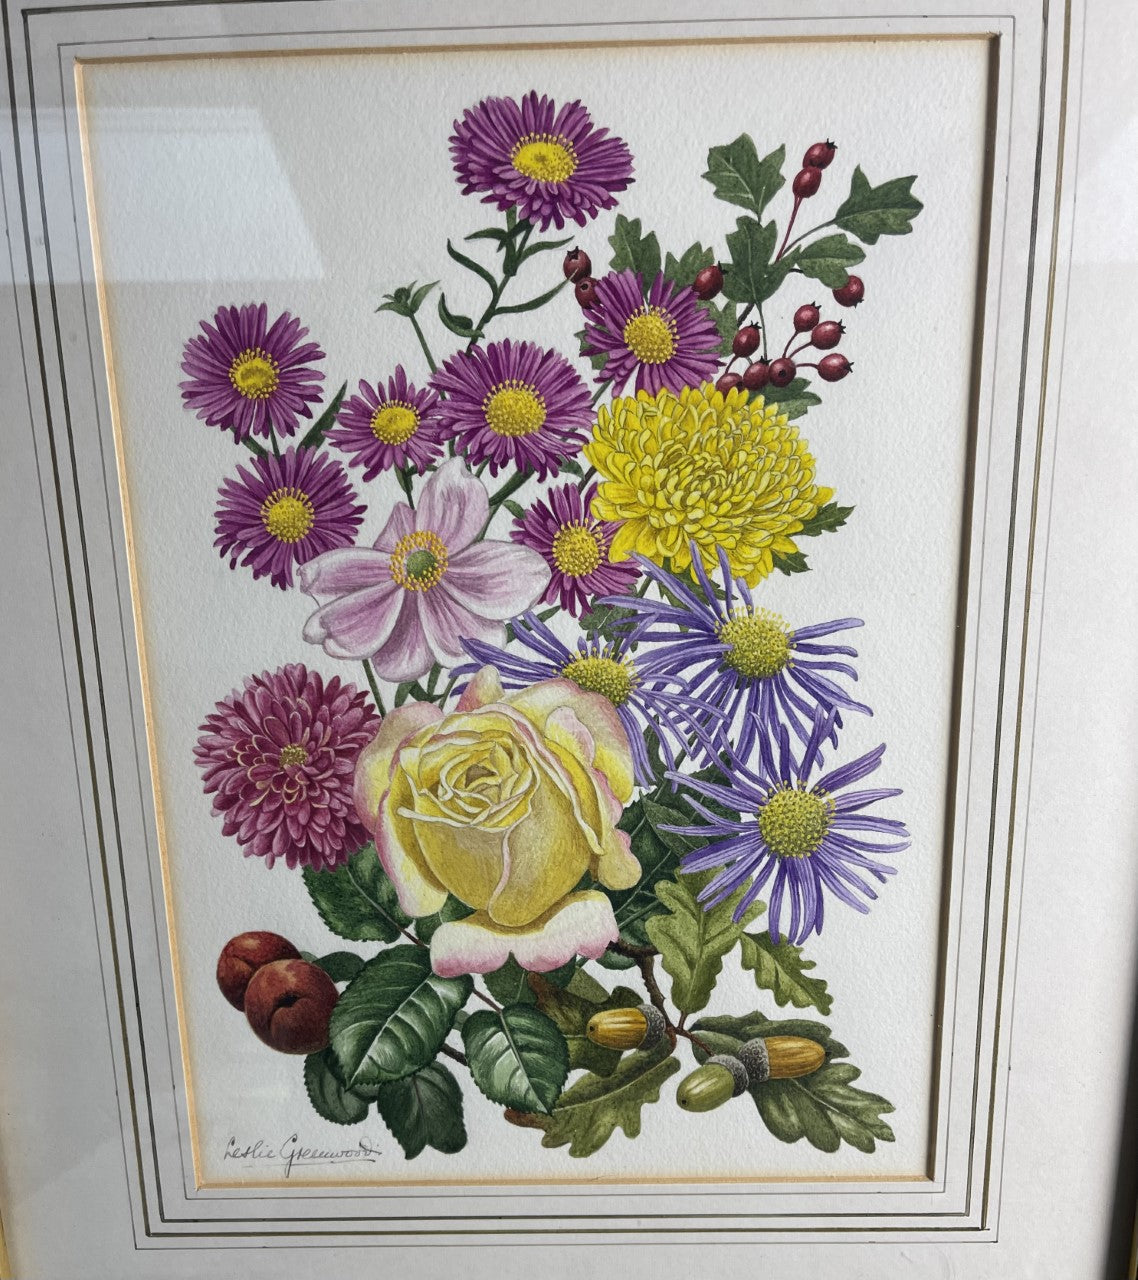 Leslie Greenwood (1907-1987): Collection of 4 Original Botanical Watercolours